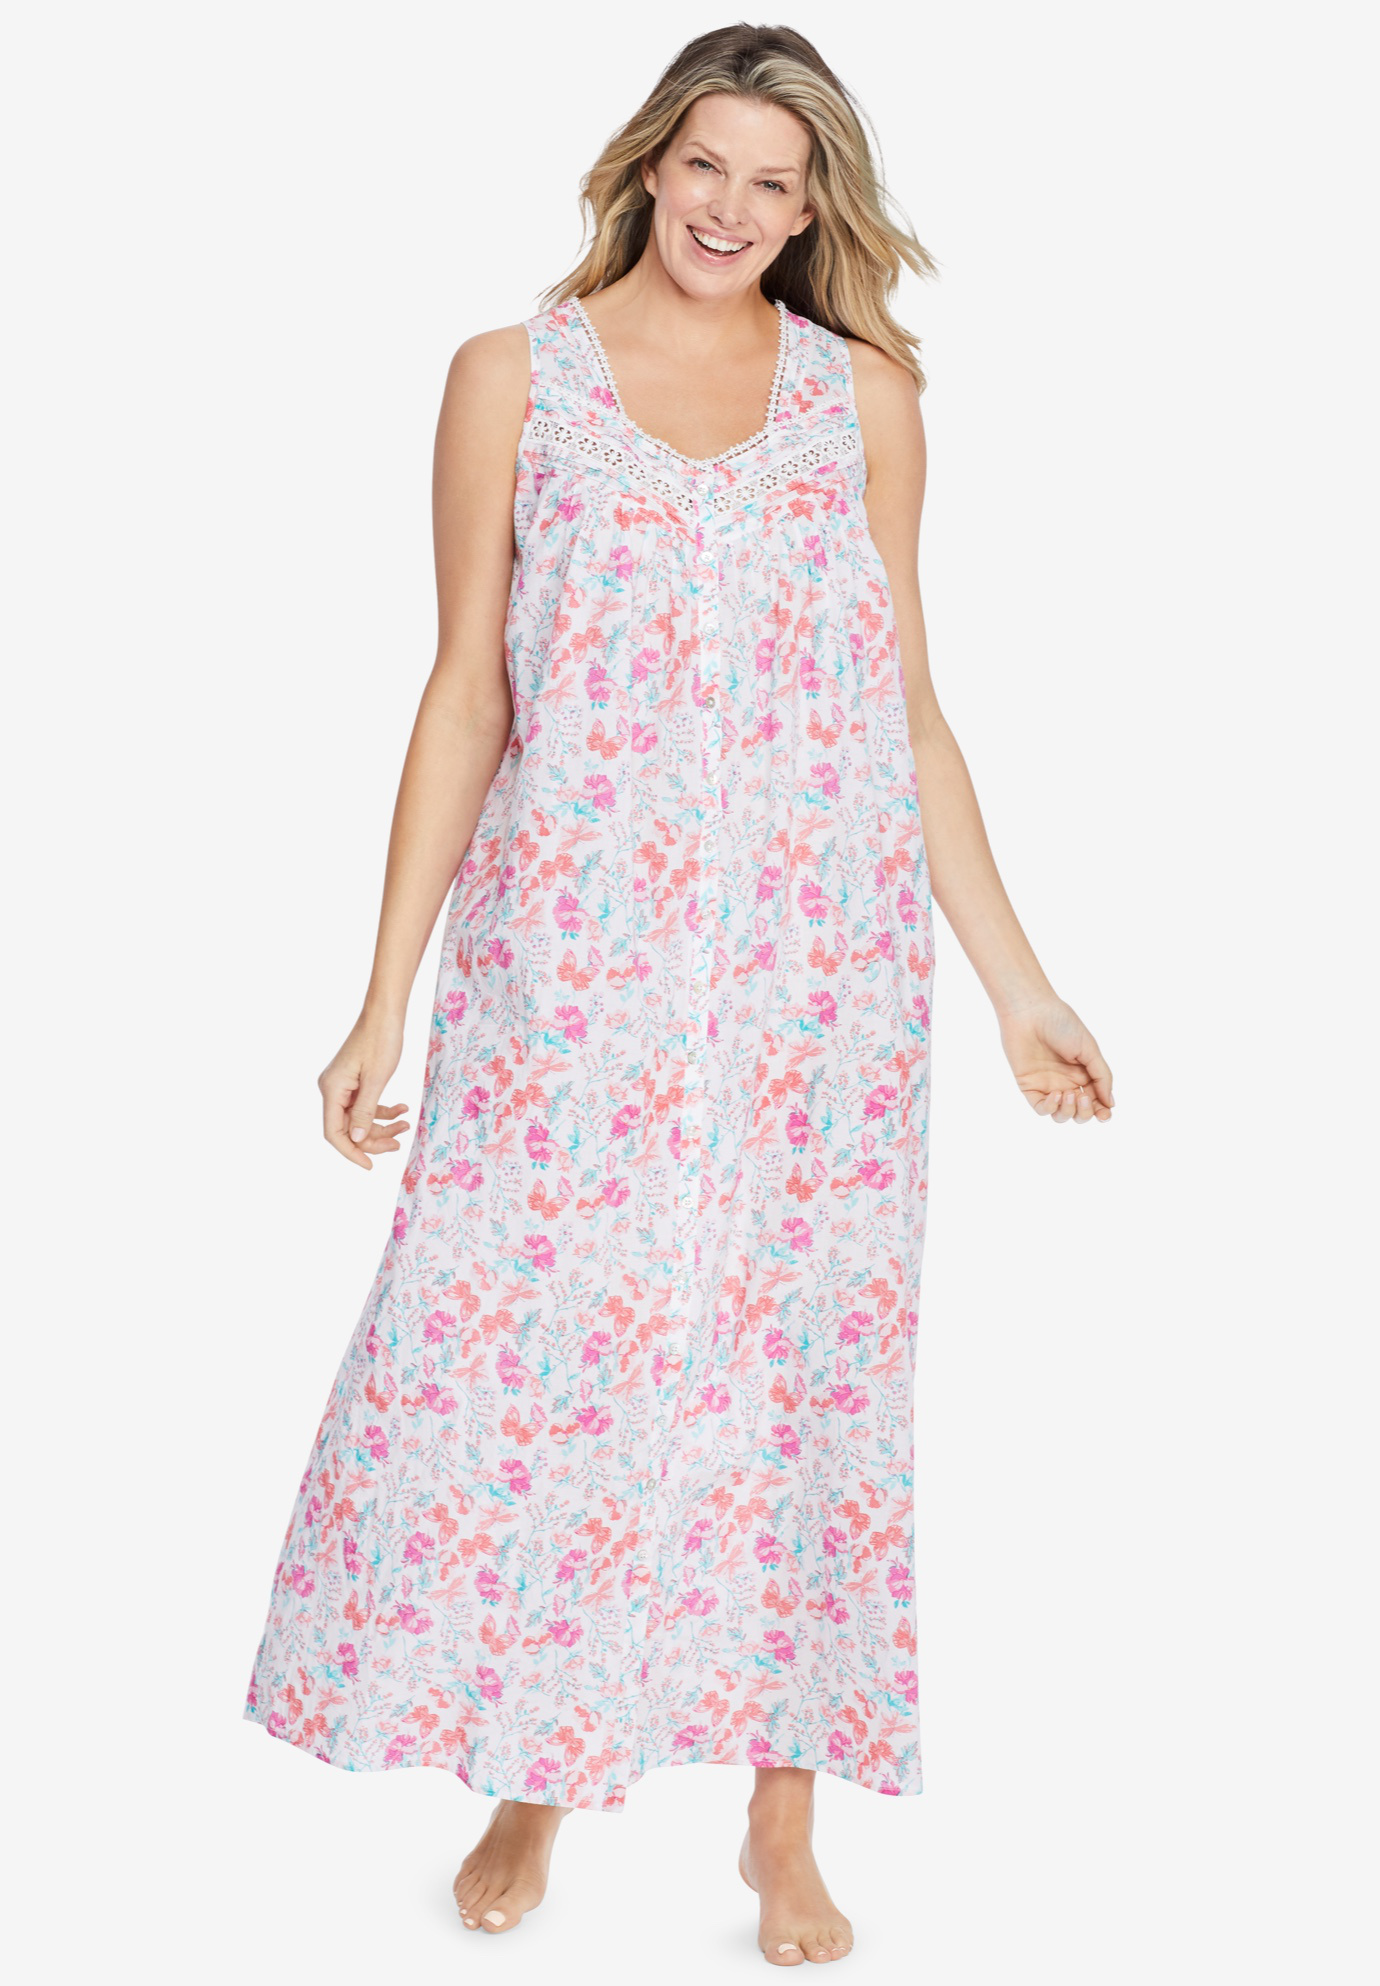 Long Sleeveless Floral Nightgown, 